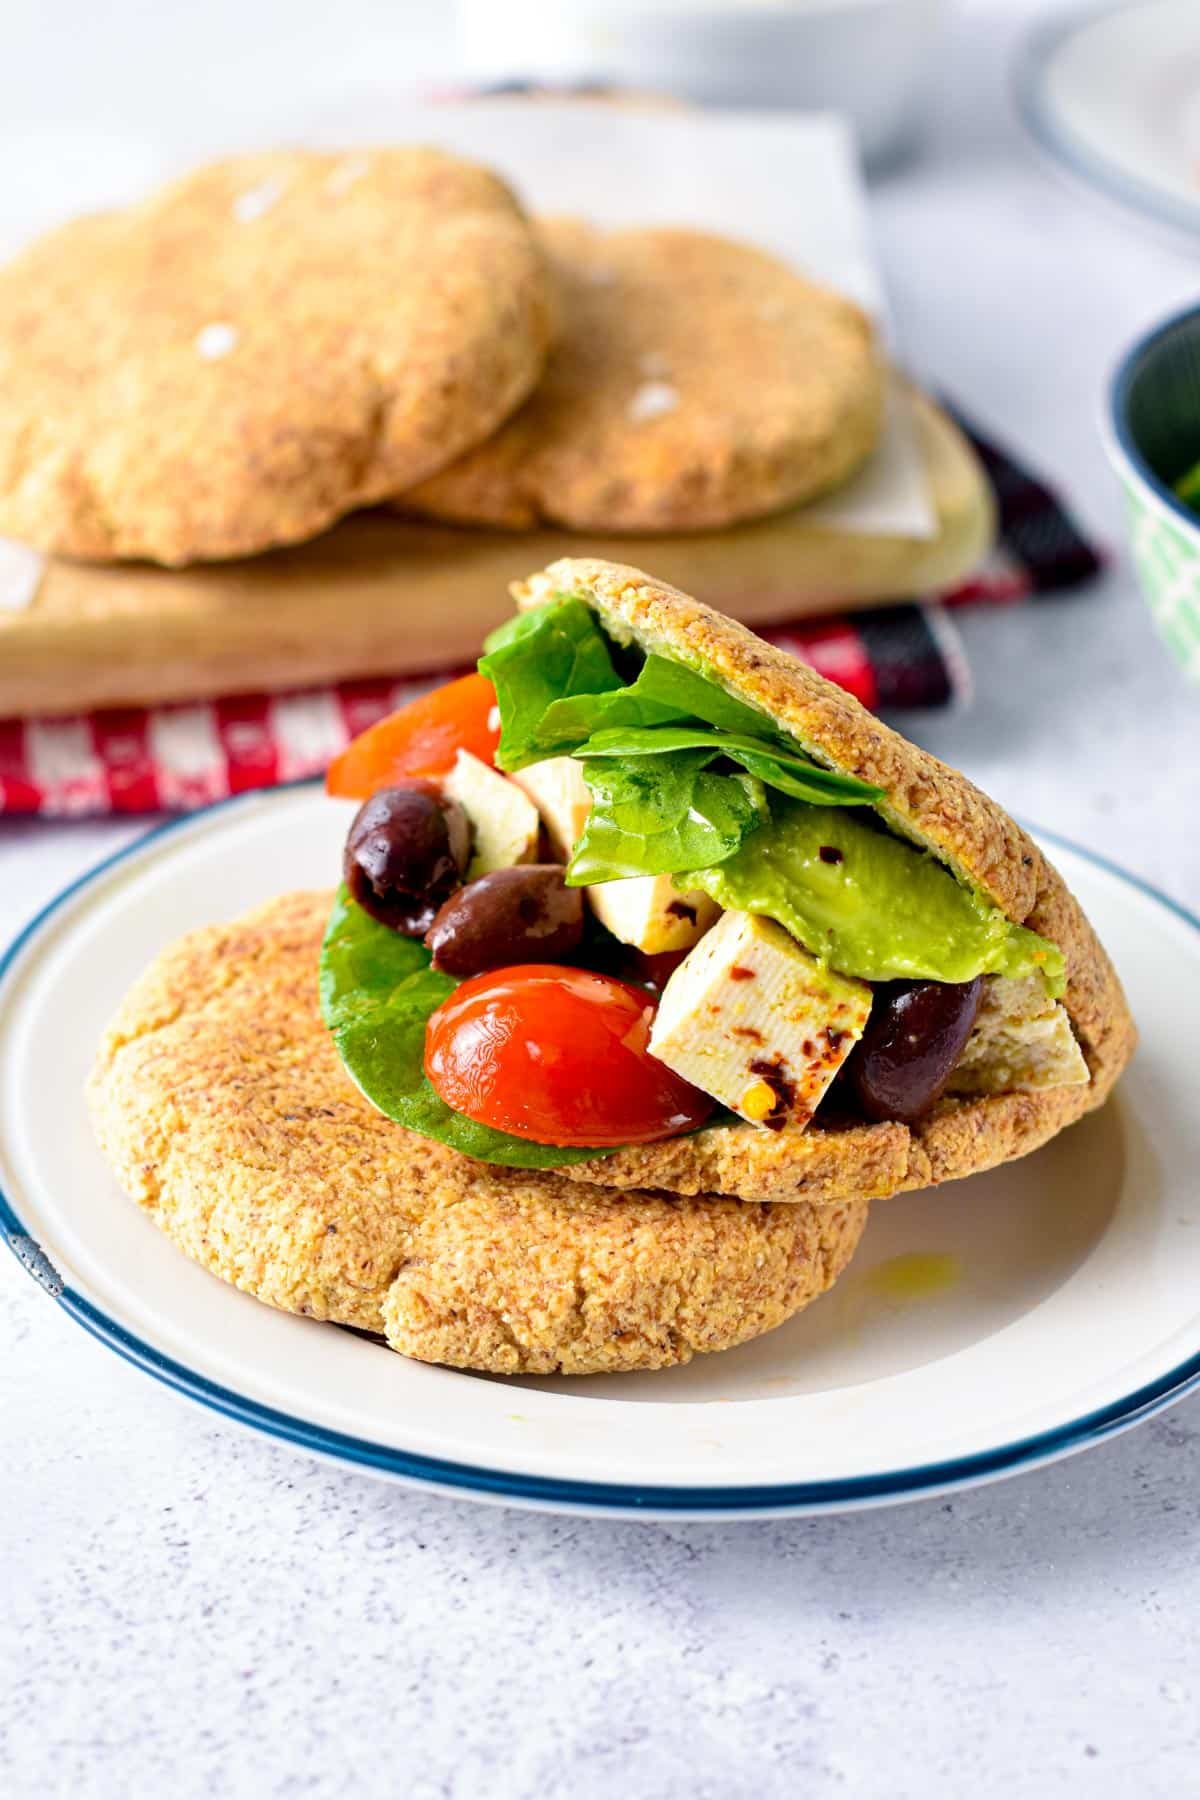 These low carb pita bread are soft, pita flatbread made from low-carb flours and no eggs so you can share with your vegan keto guest. Plus, one pita bread only contains 4.4 g net carbs and they are gluten-free.